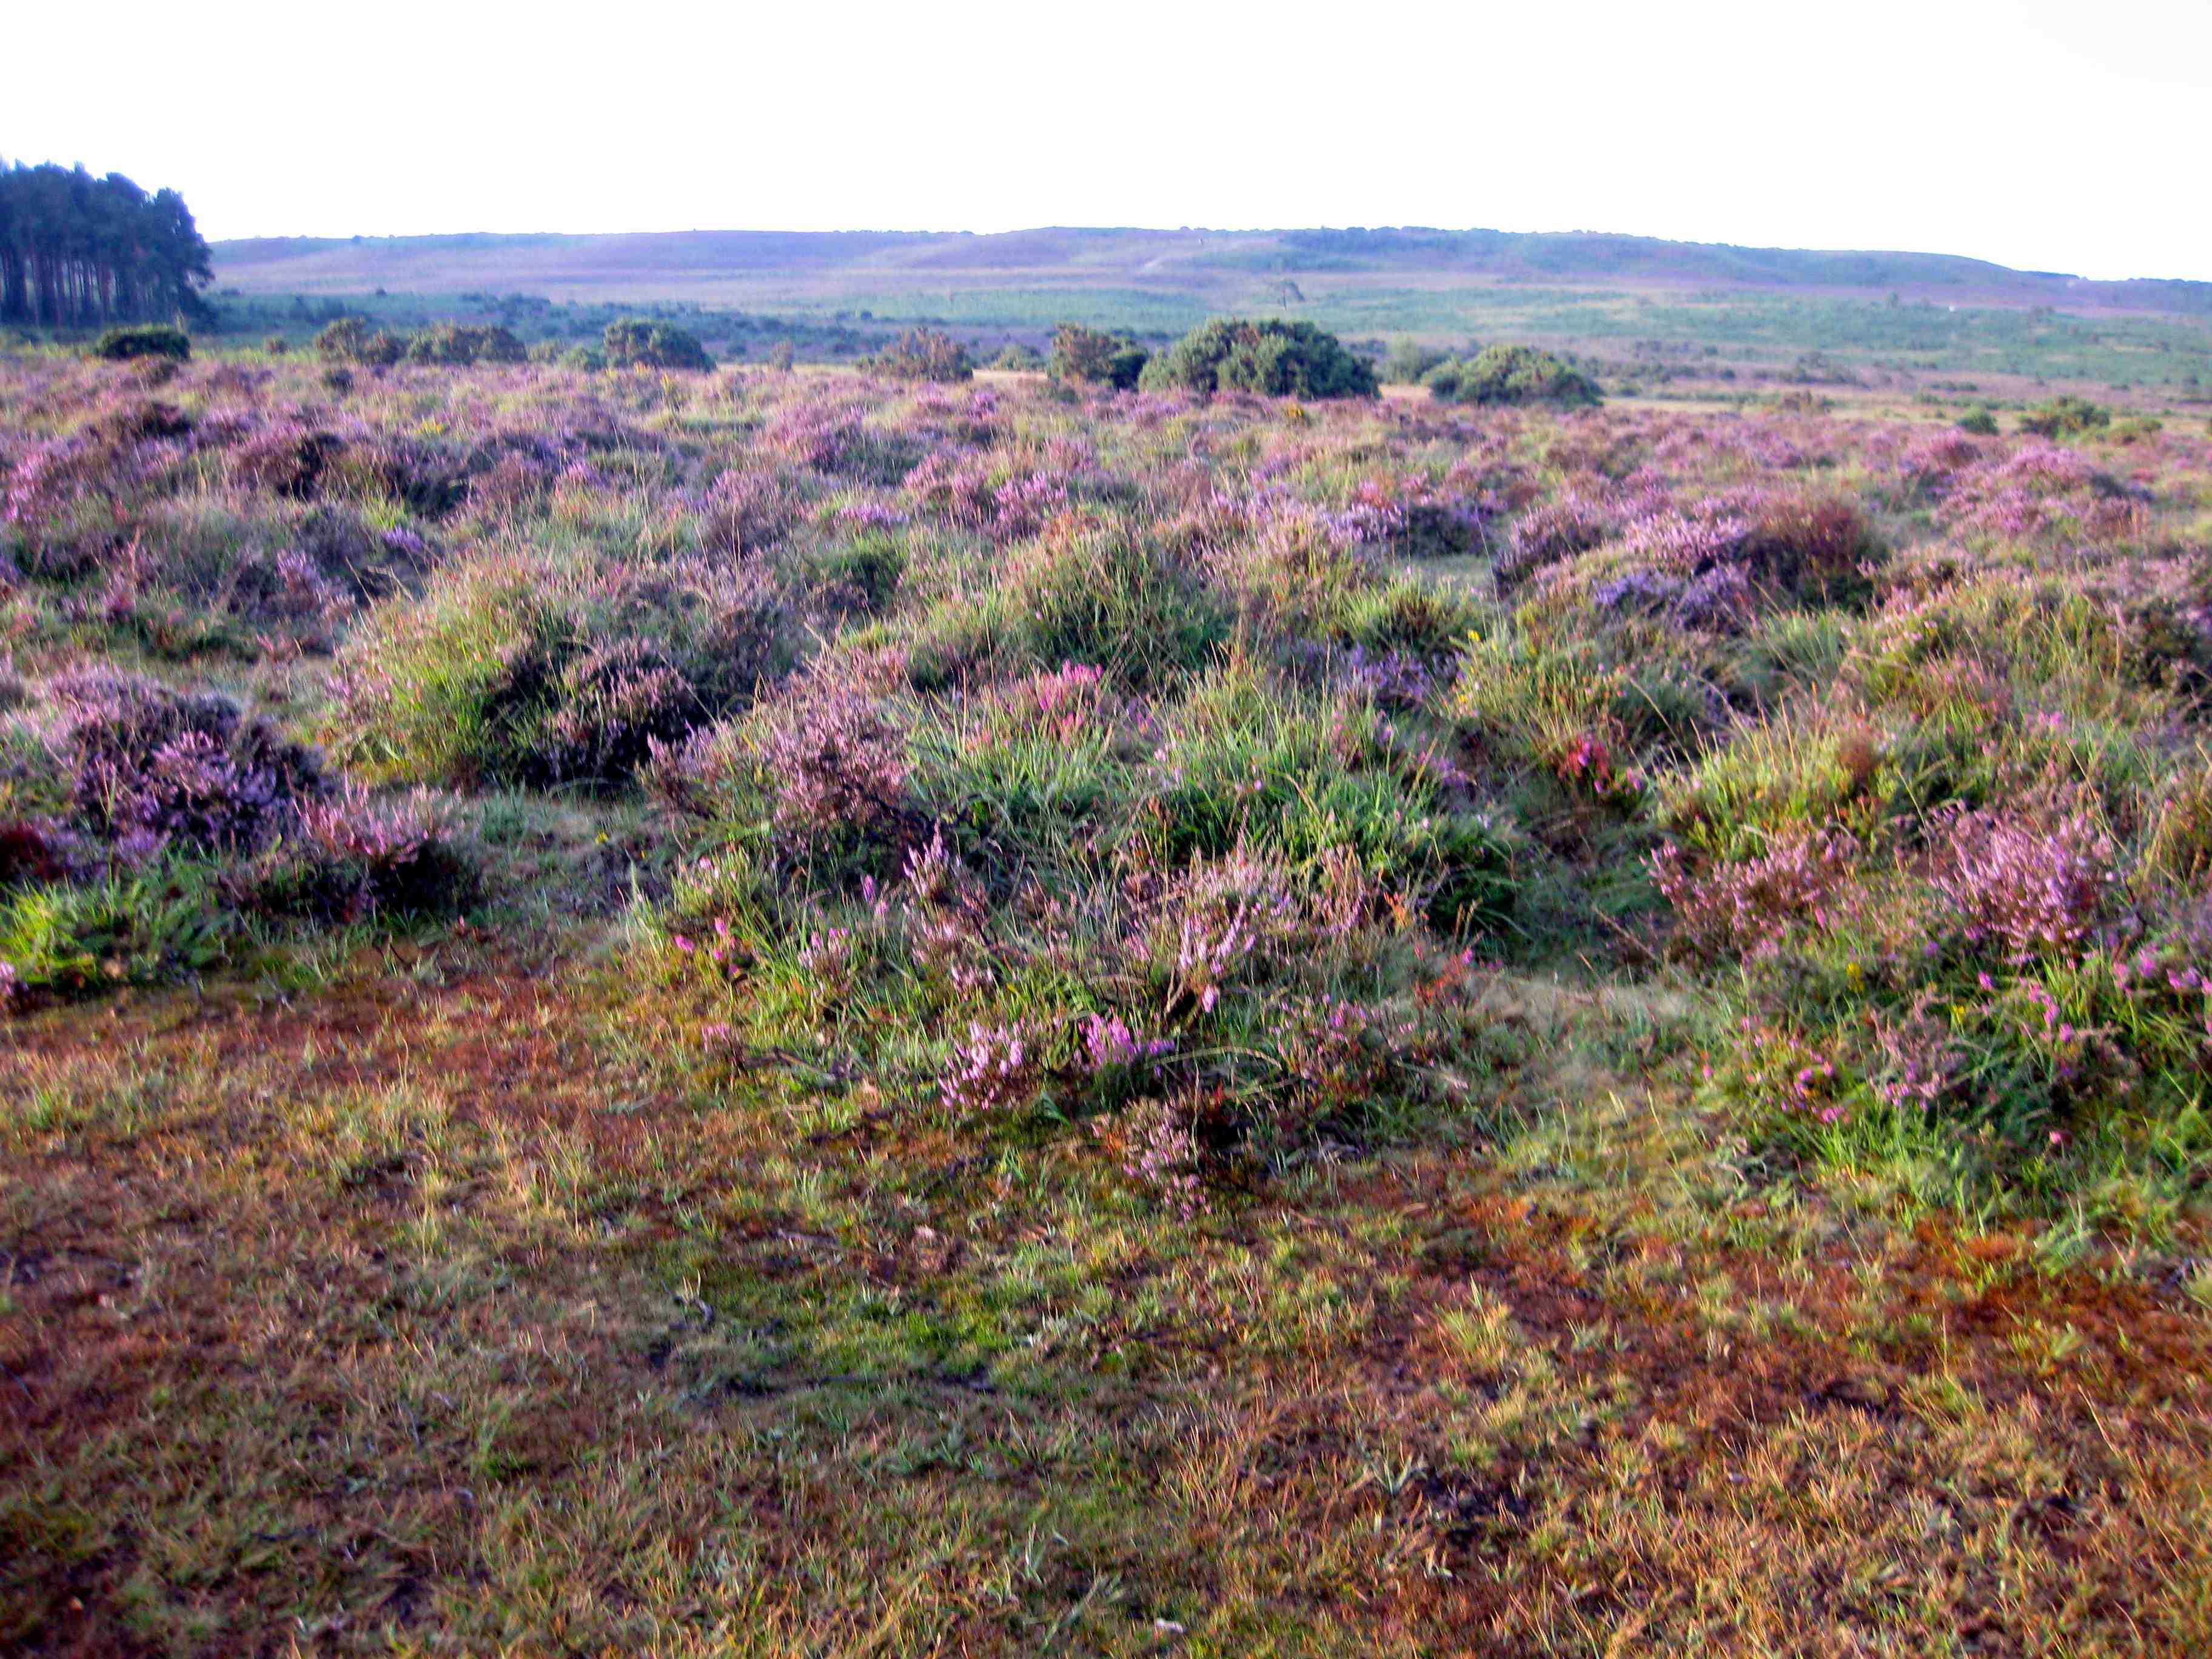 The New Forest heather covers the landscape in lilacs and purples.